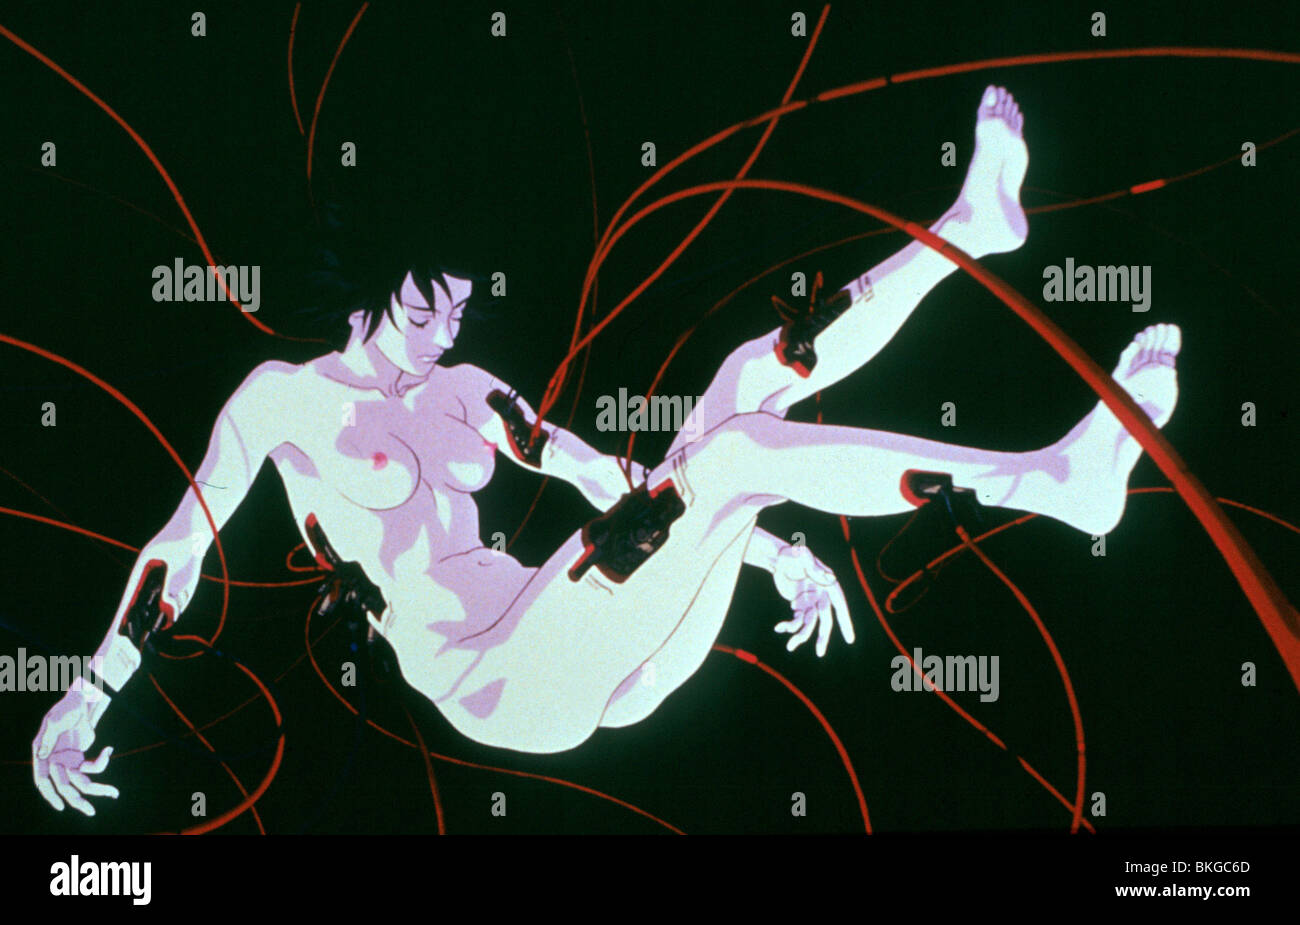 GHOST IN THE SHELL (1995) ANIMATION 004 B-8810 Banque D'Images